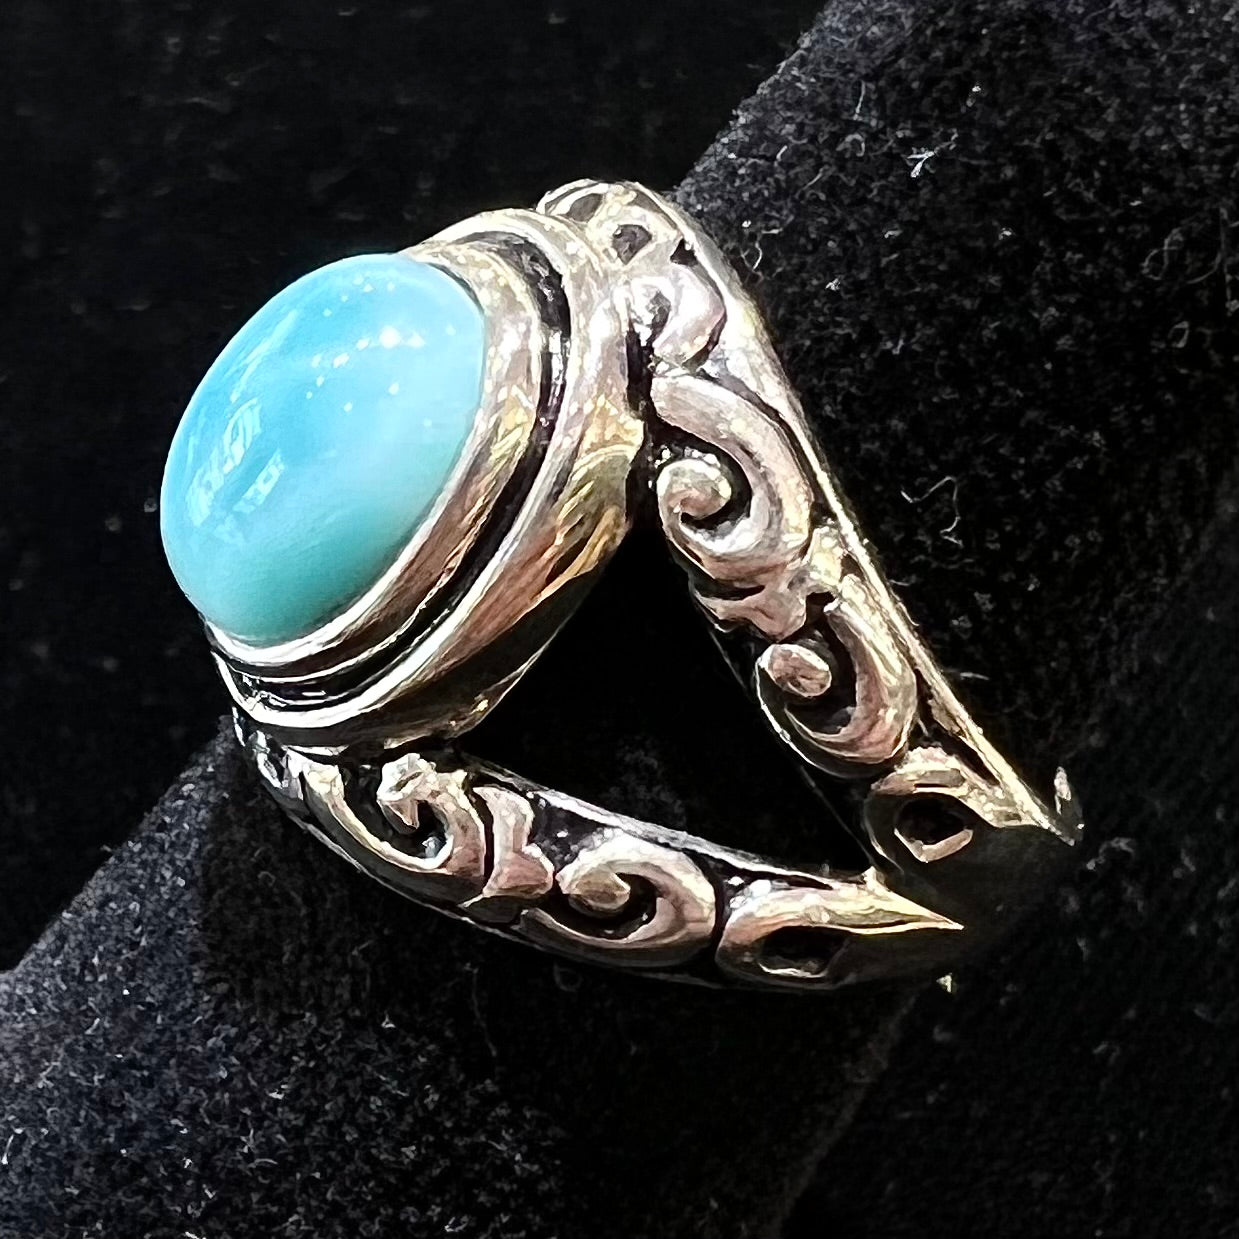 Sterling silver ring with black antiqued highlights set with blue larimar stone.